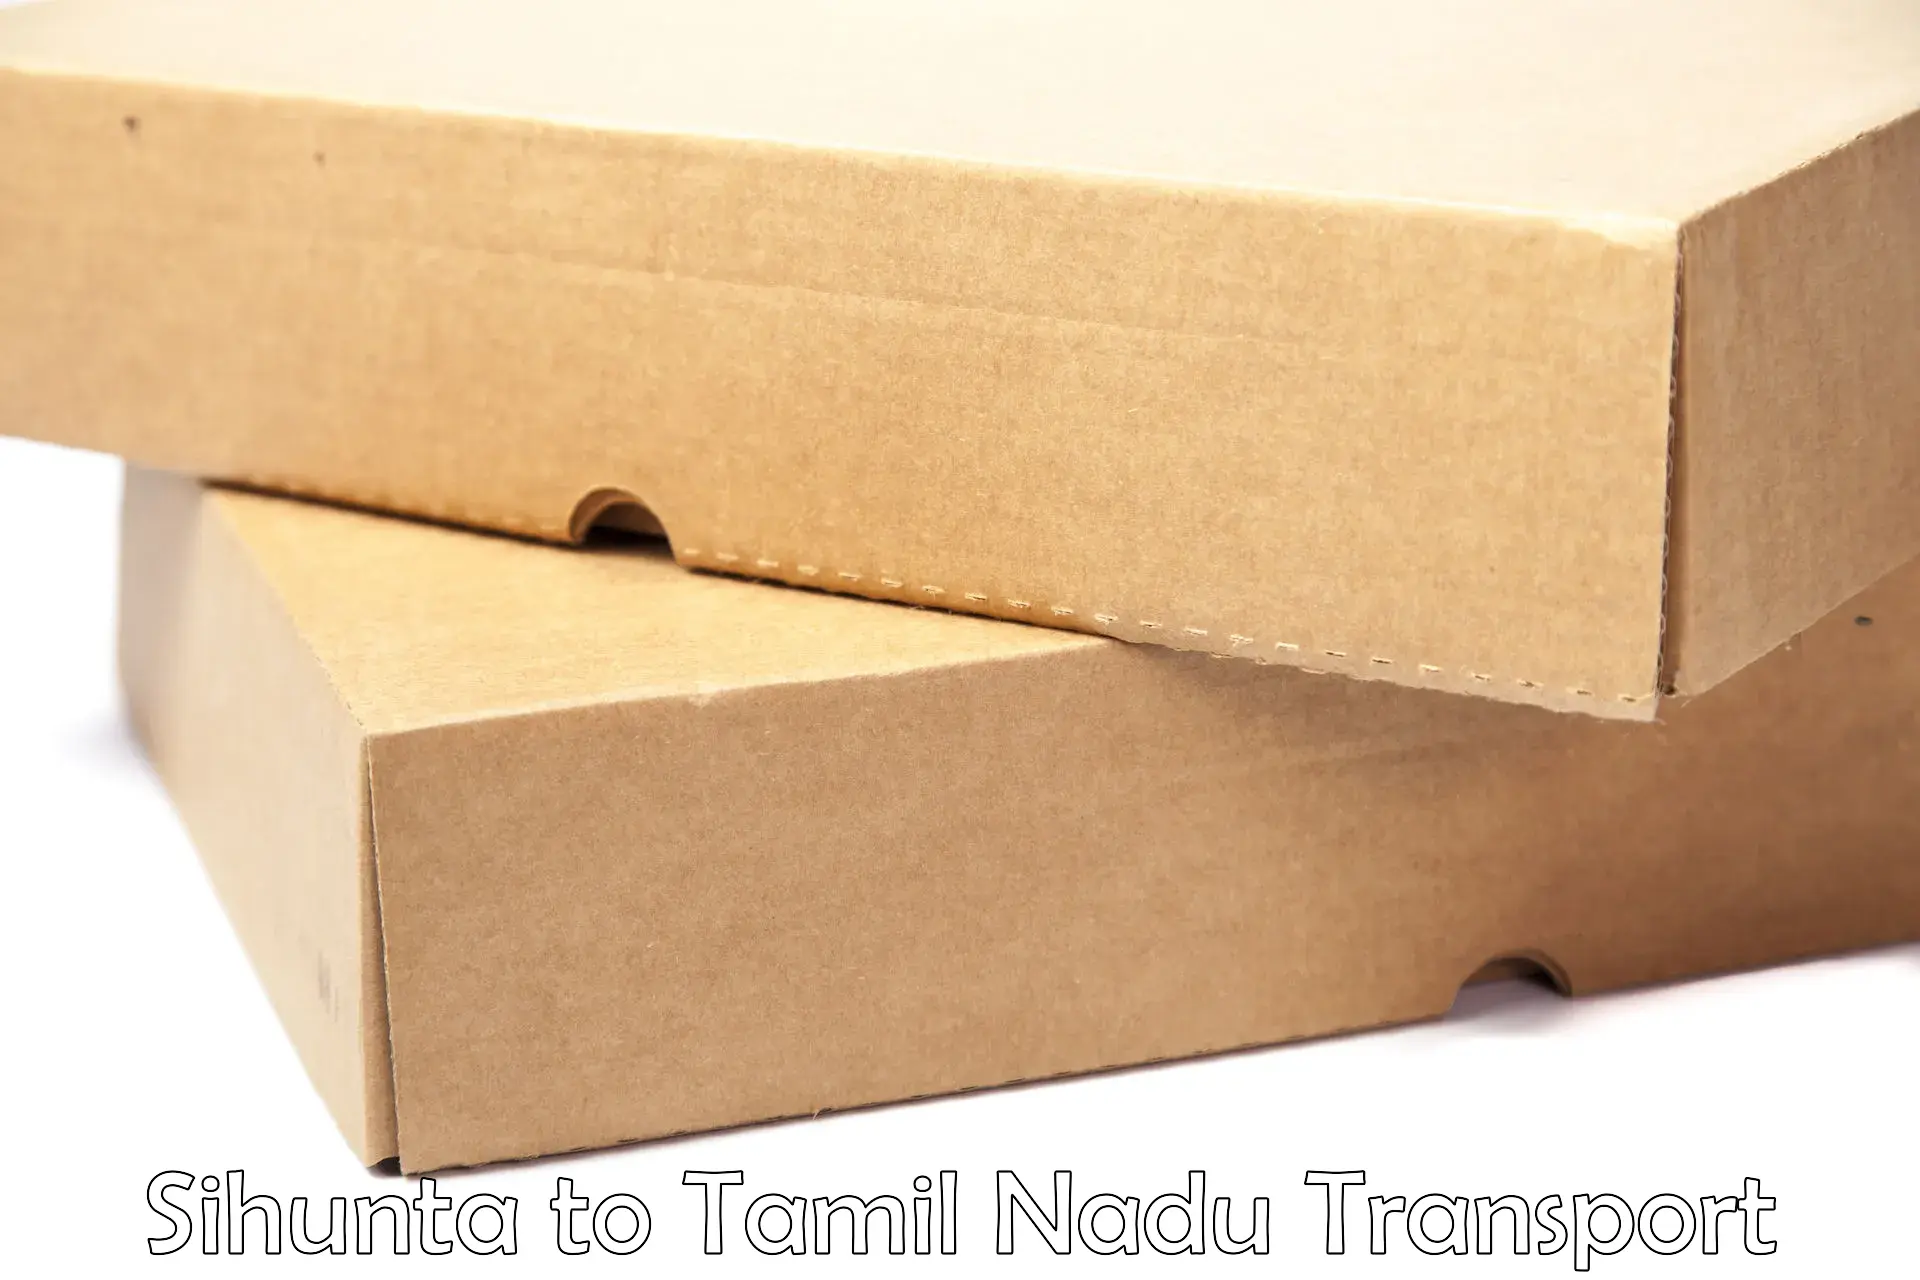 Delivery service Sihunta to Chennai